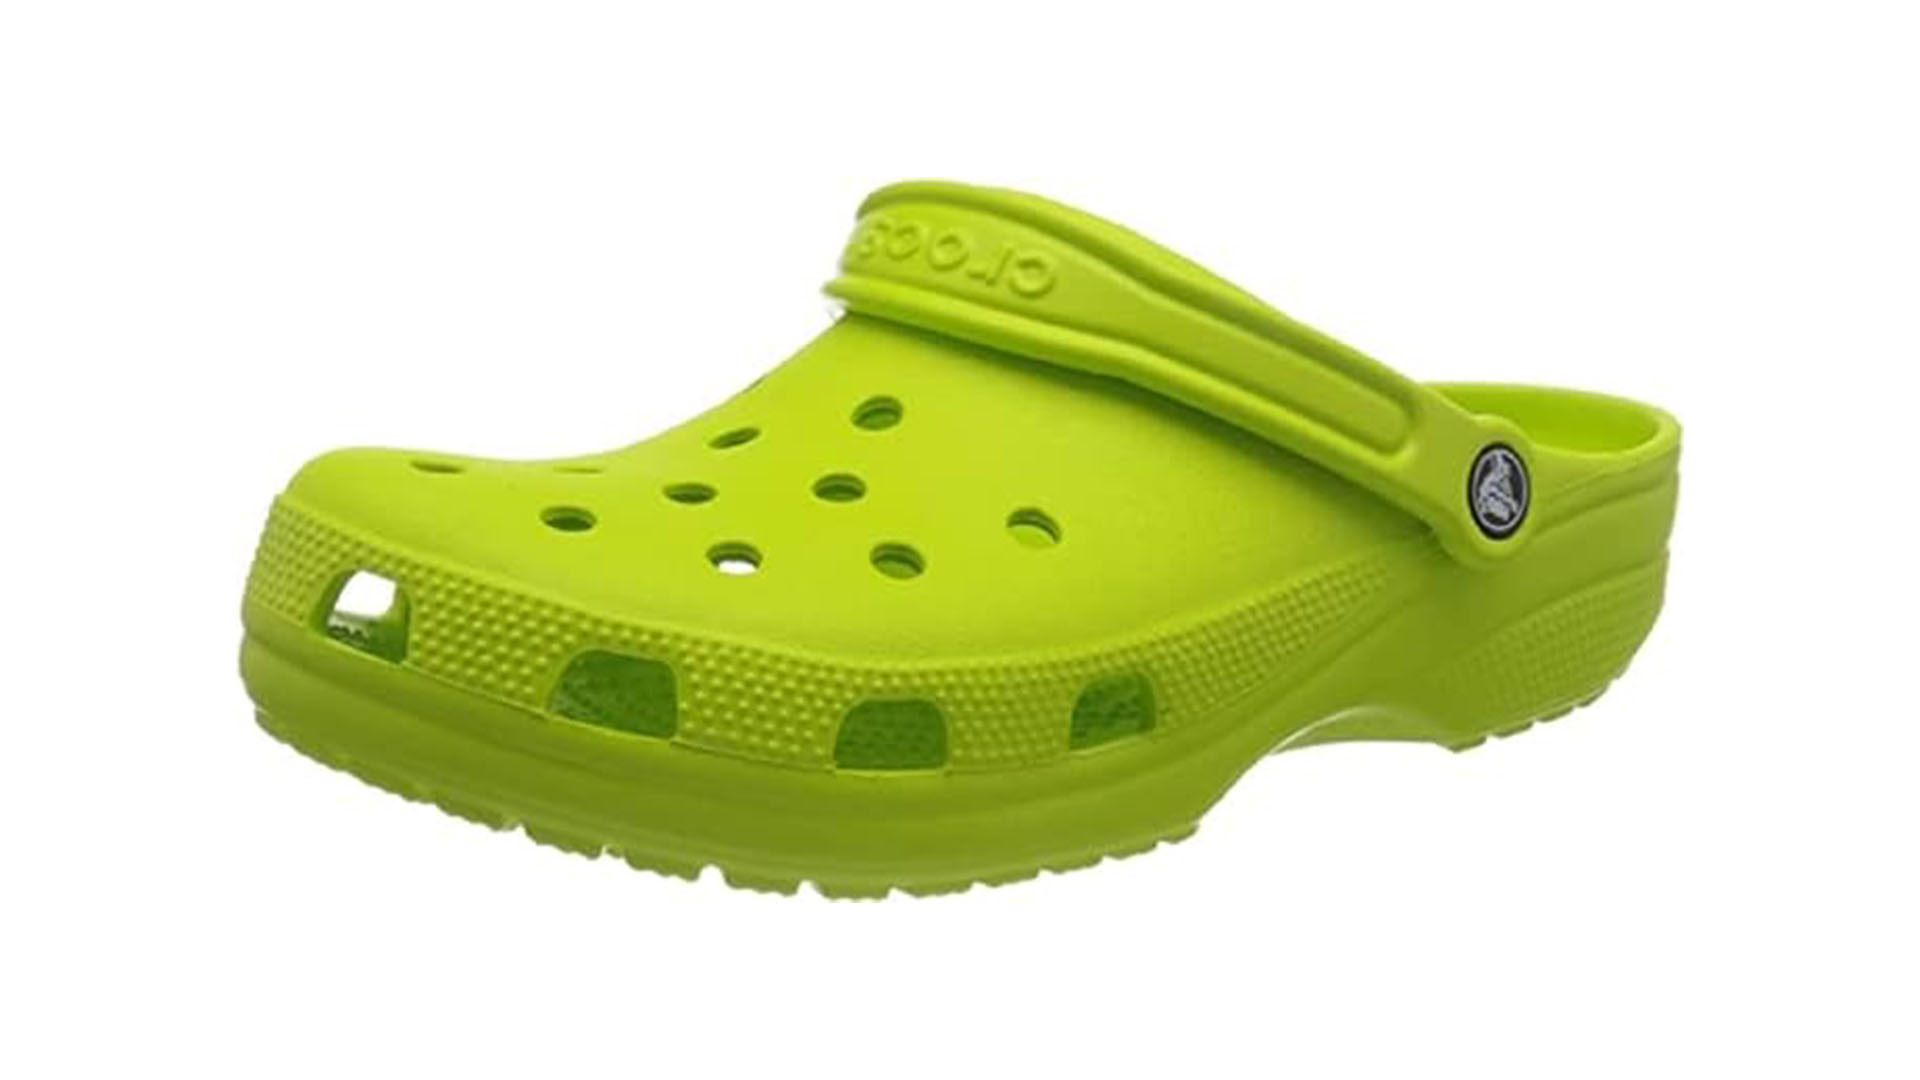 How To Build Your Own Dupe Of The Sold-Out Shrek Crocs Seen On Sonia Chew &  Joakim Gomez - 8days